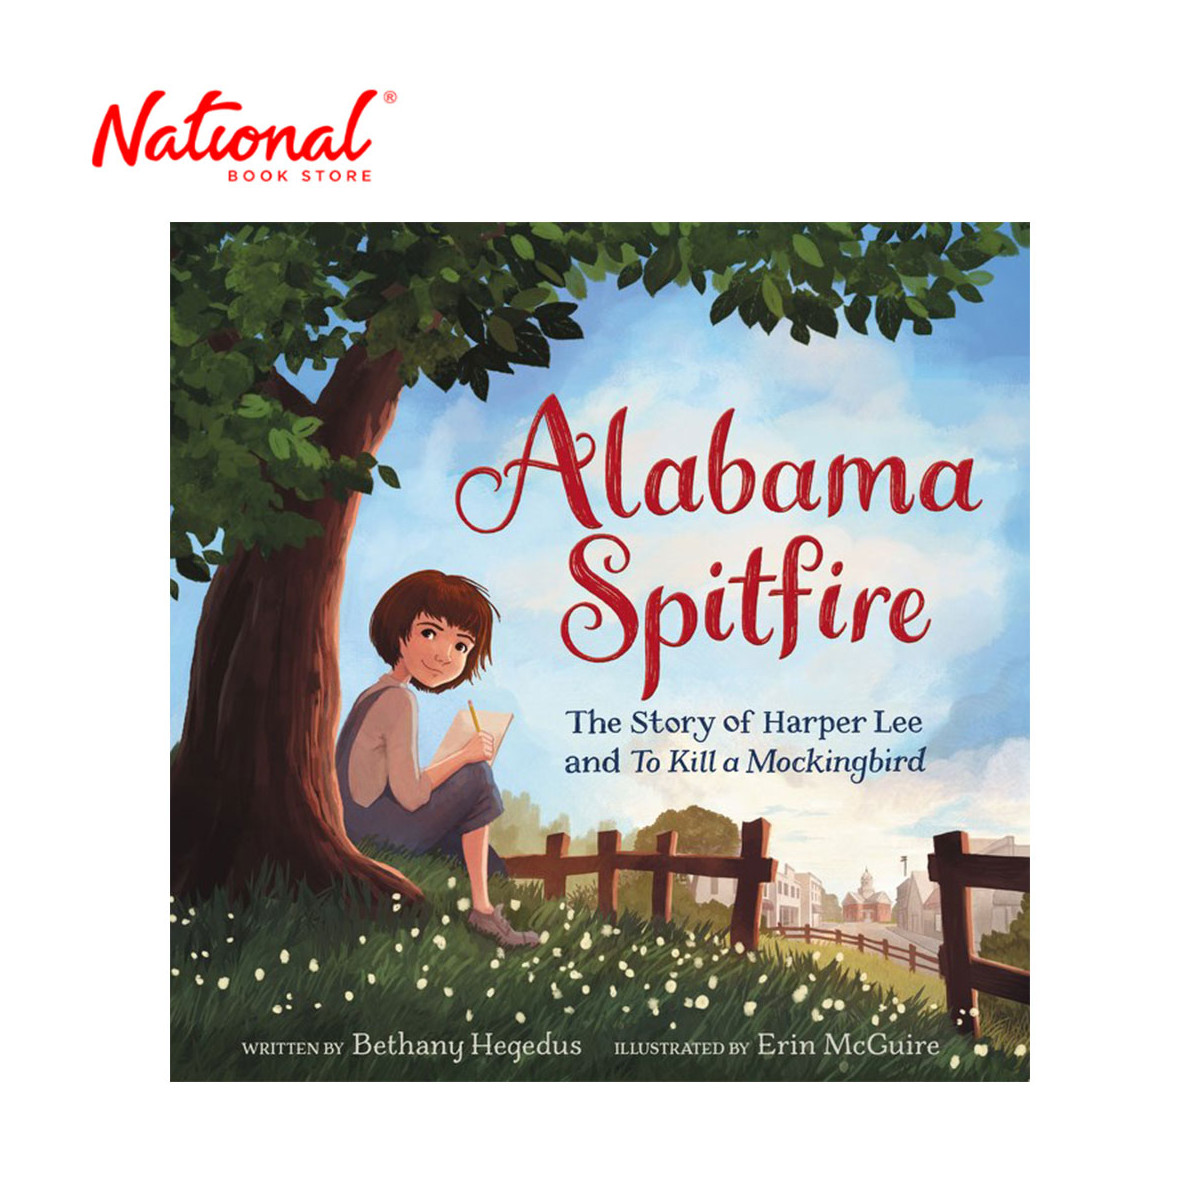 Alabama Spitfire: The Story Of Harper Lee And To Kill A Mockingbird By Bethany Hegedus - Hardcover